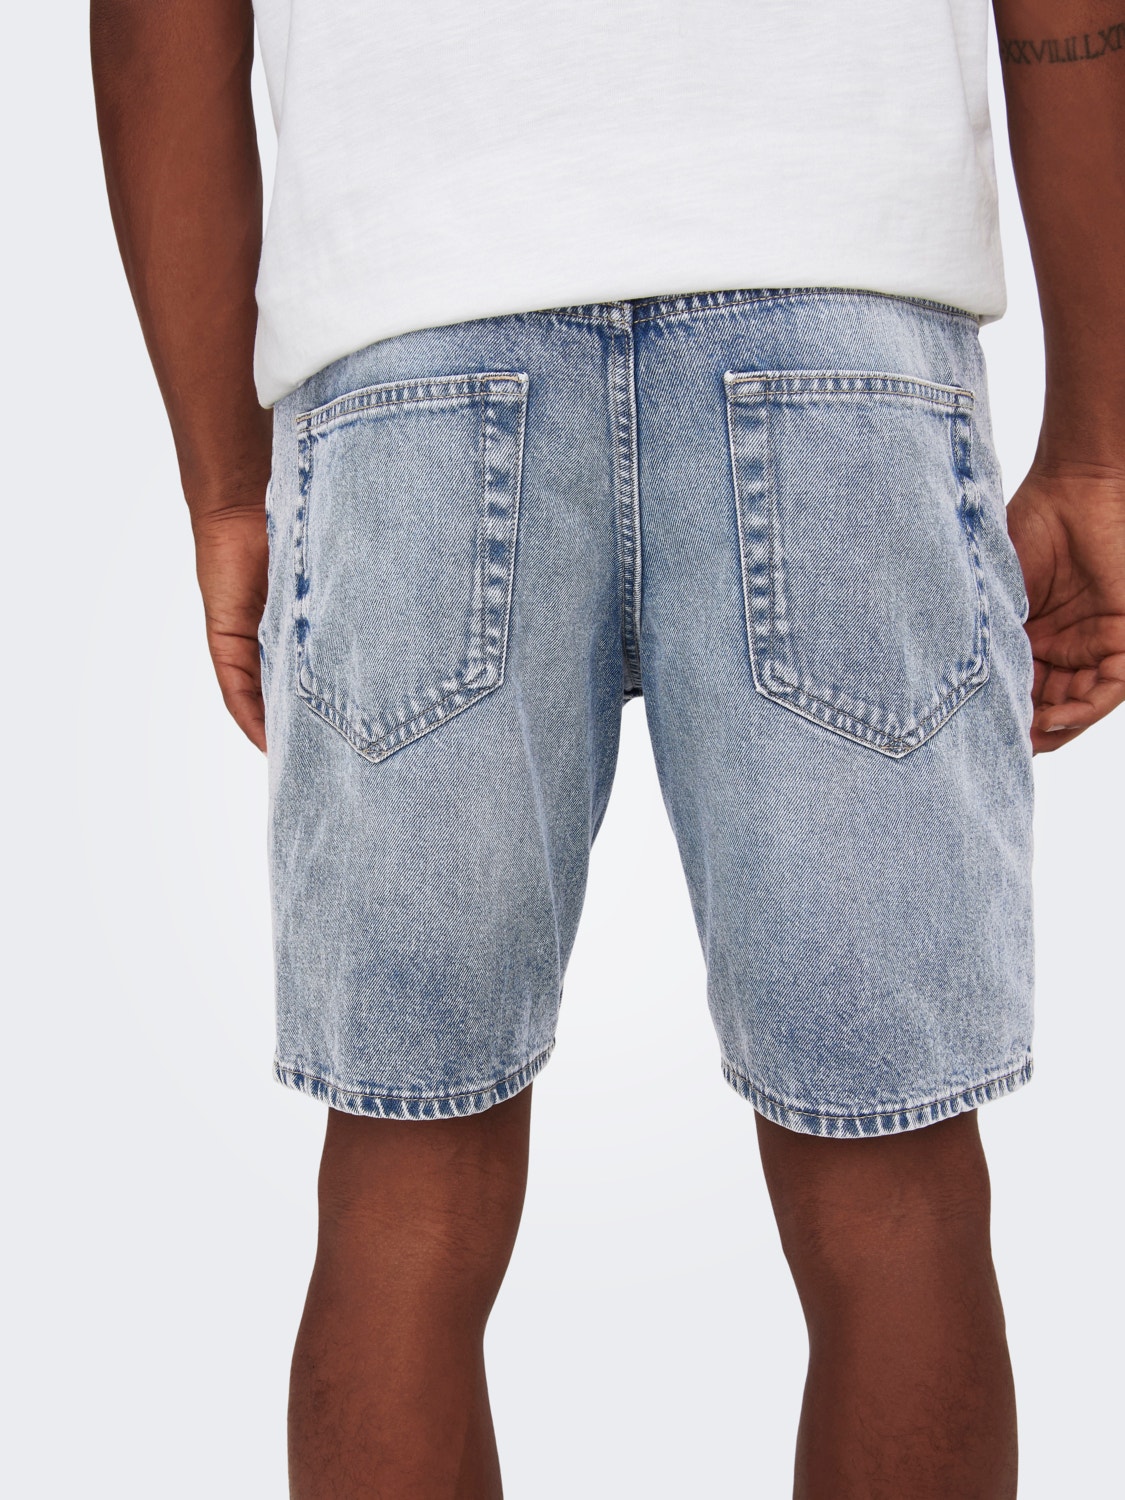 ONLY & SONS Shorts Loose Fit Taille classique -Light Blue Denim - 22024846